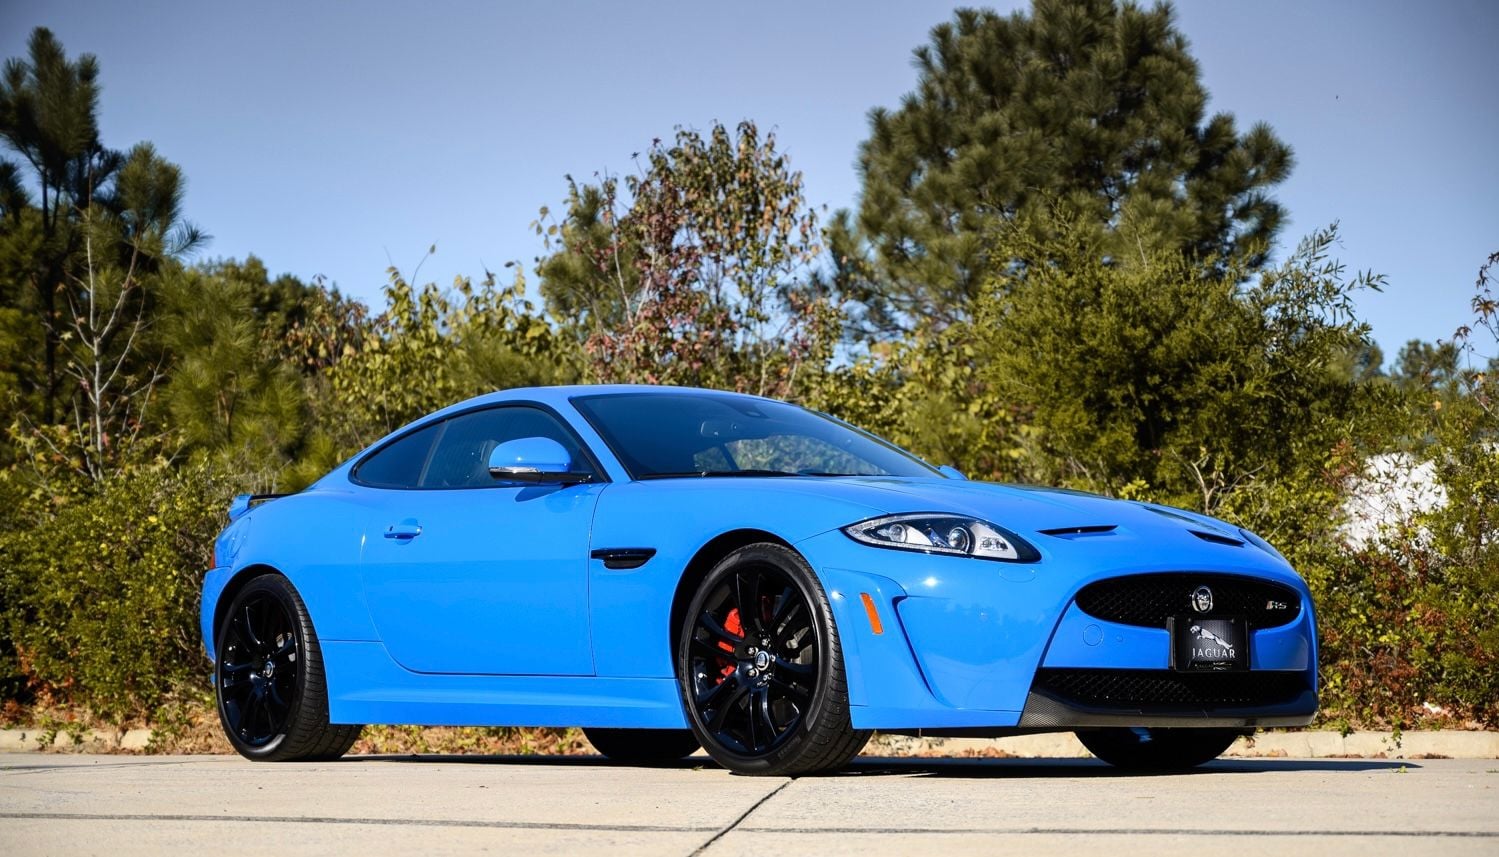 2012 Jaguar XKR-S - FRB XKR-S Coupe, 18K Miles - Used - VIN SAJWA4HA4CMB47130 - 18,000 Miles - 8 cyl - 2WD - Automatic - Coupe - Blue - Potomac, MD 20854, United States